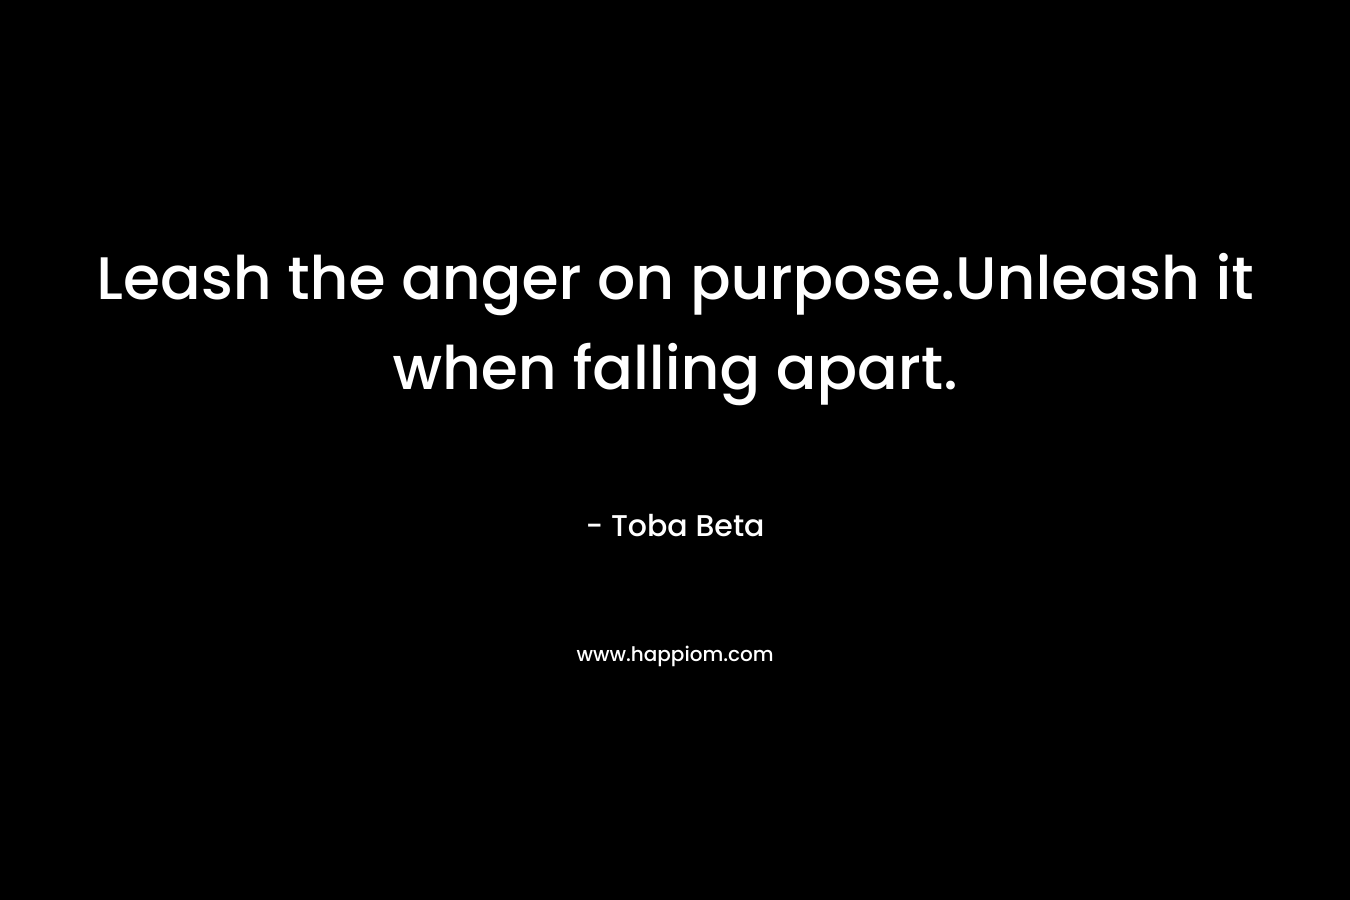 Leash the anger on purpose.Unleash it when falling apart.